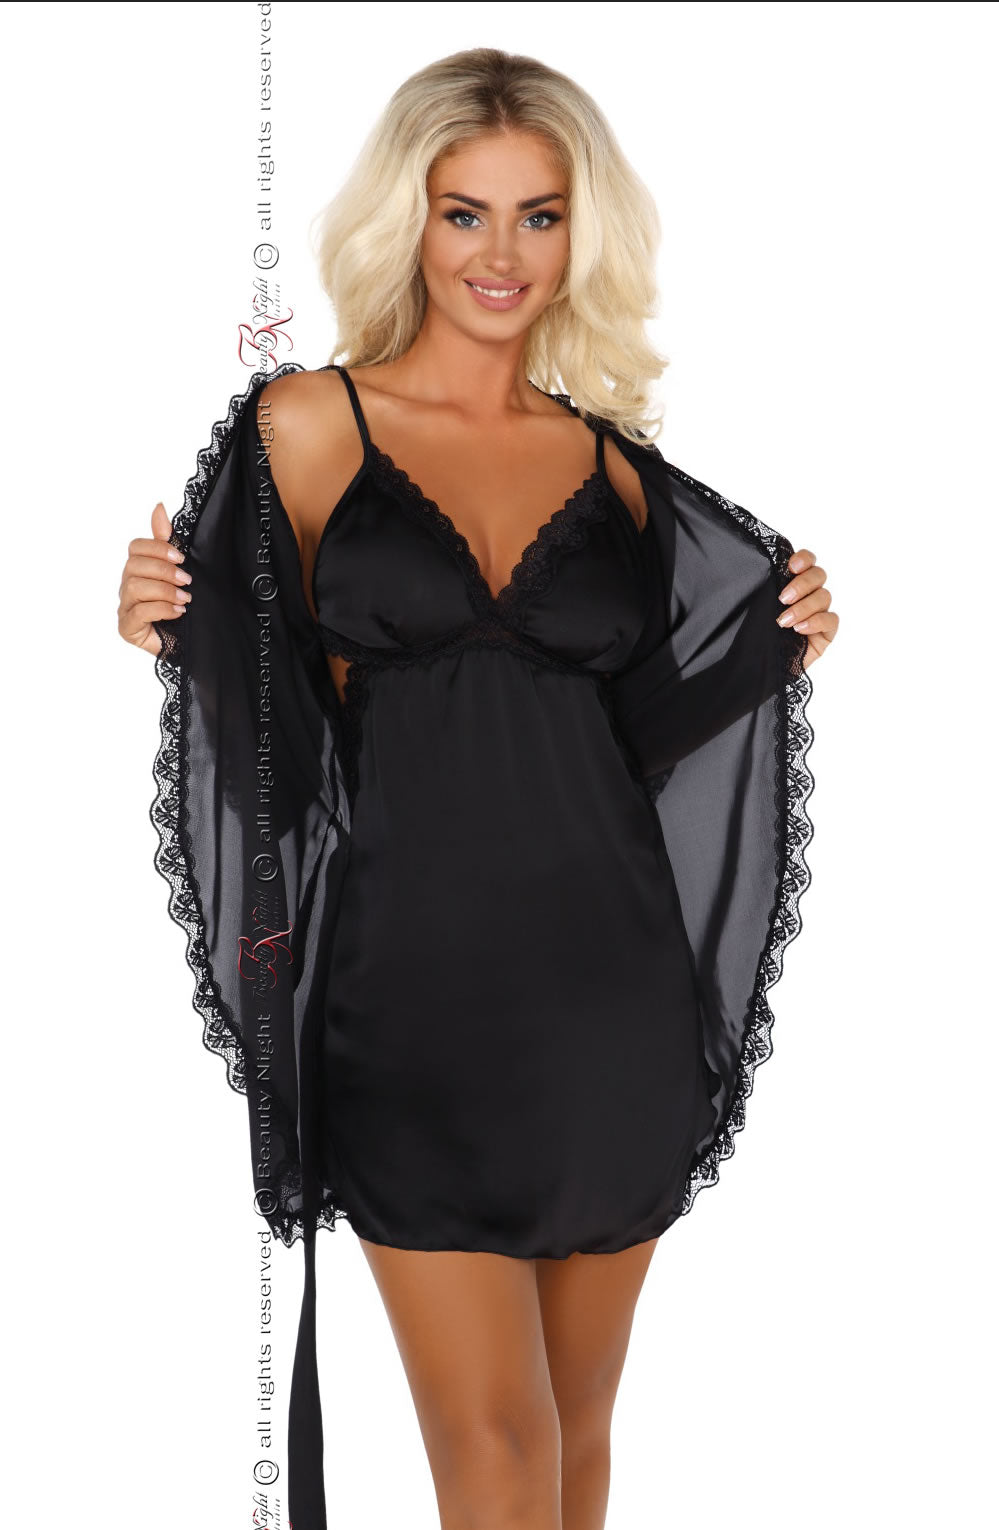 Beauty Night Shannon Dressing Gown Black